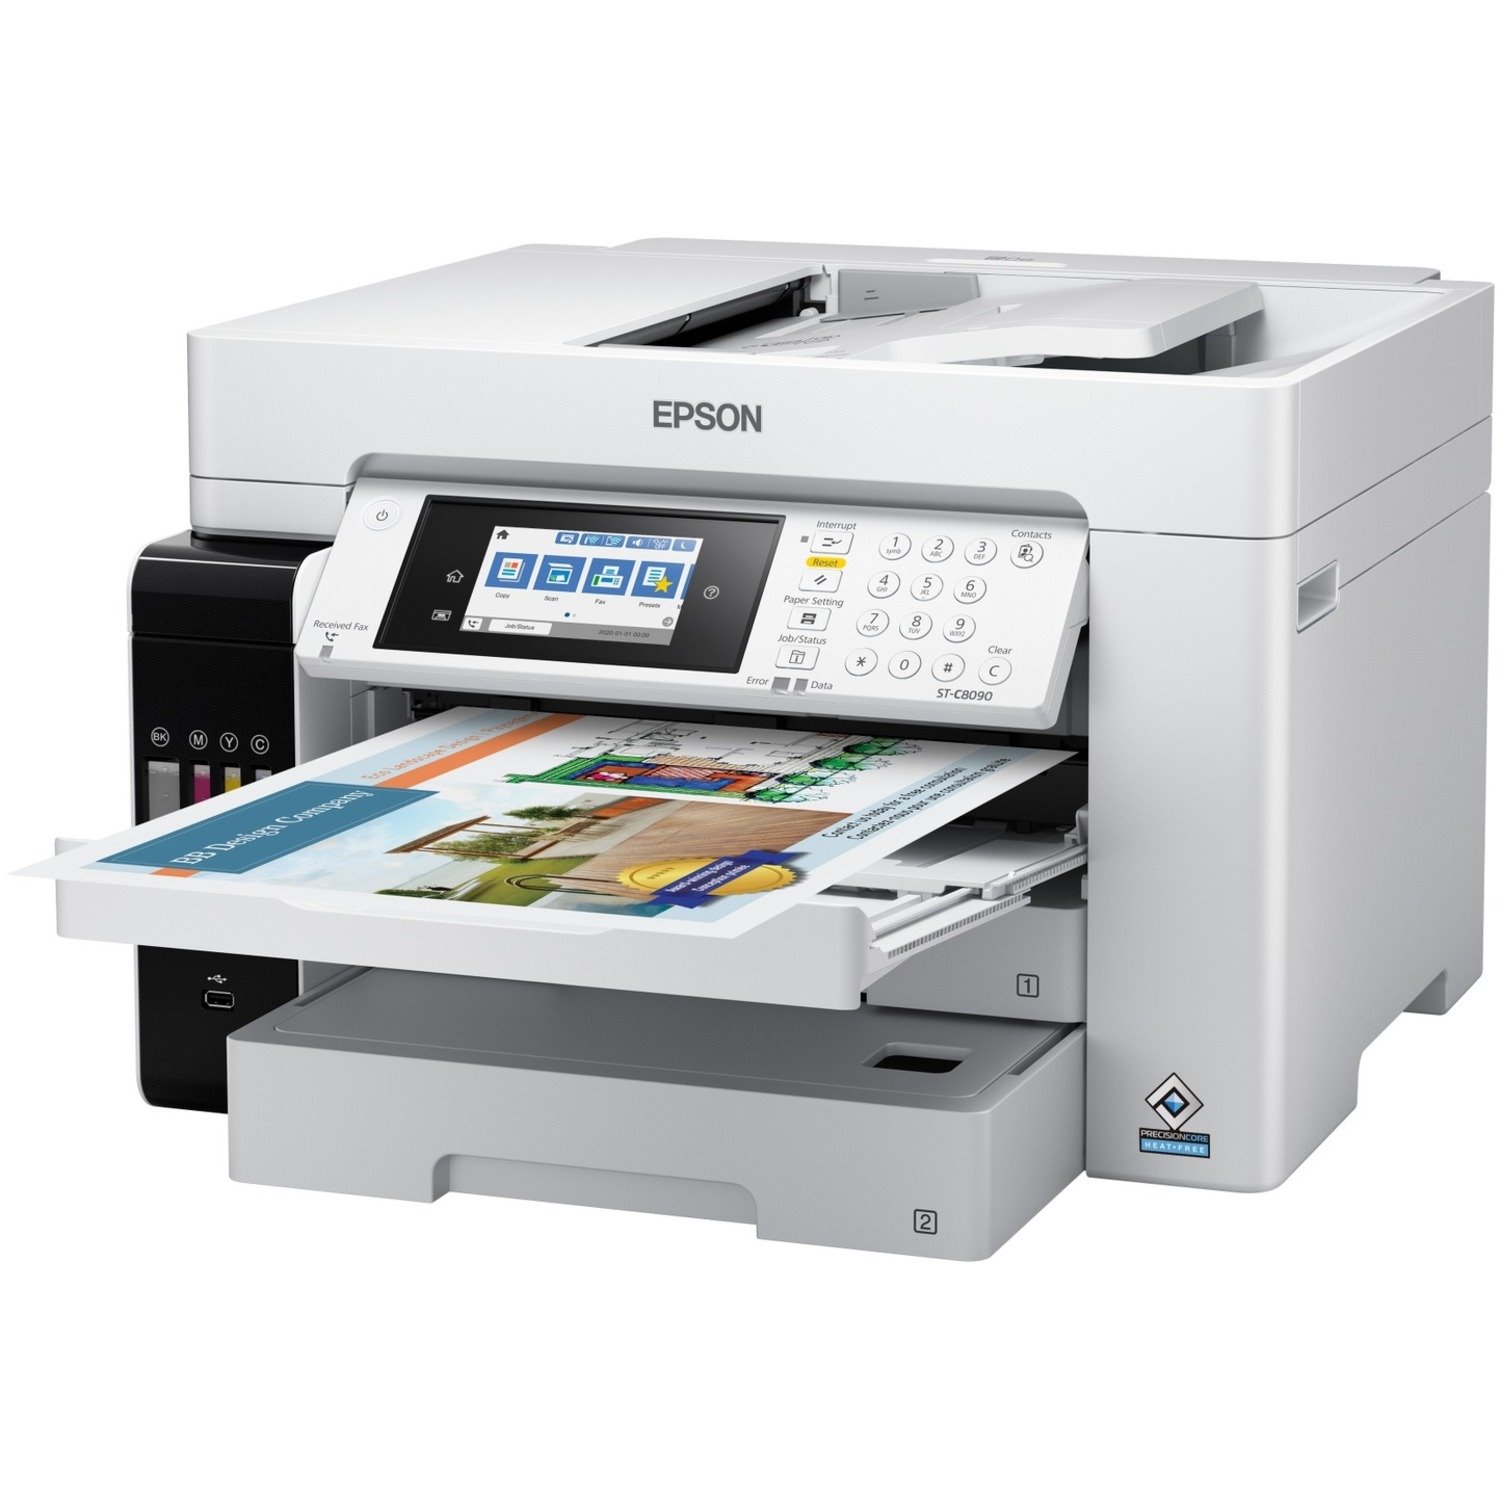 Epson WorkForce ST-C8090 Inkjet Multifunction Printer-Color-Copier/Fax/Scanner-4800x1200 dpi Print-Automatic Duplex Print-66000 Pages-550 sheets Input-Color Flatbed Scanner-1200 dpi Optical Scan-Color Fax-Wireless LAN-Epson Connect-Mopria